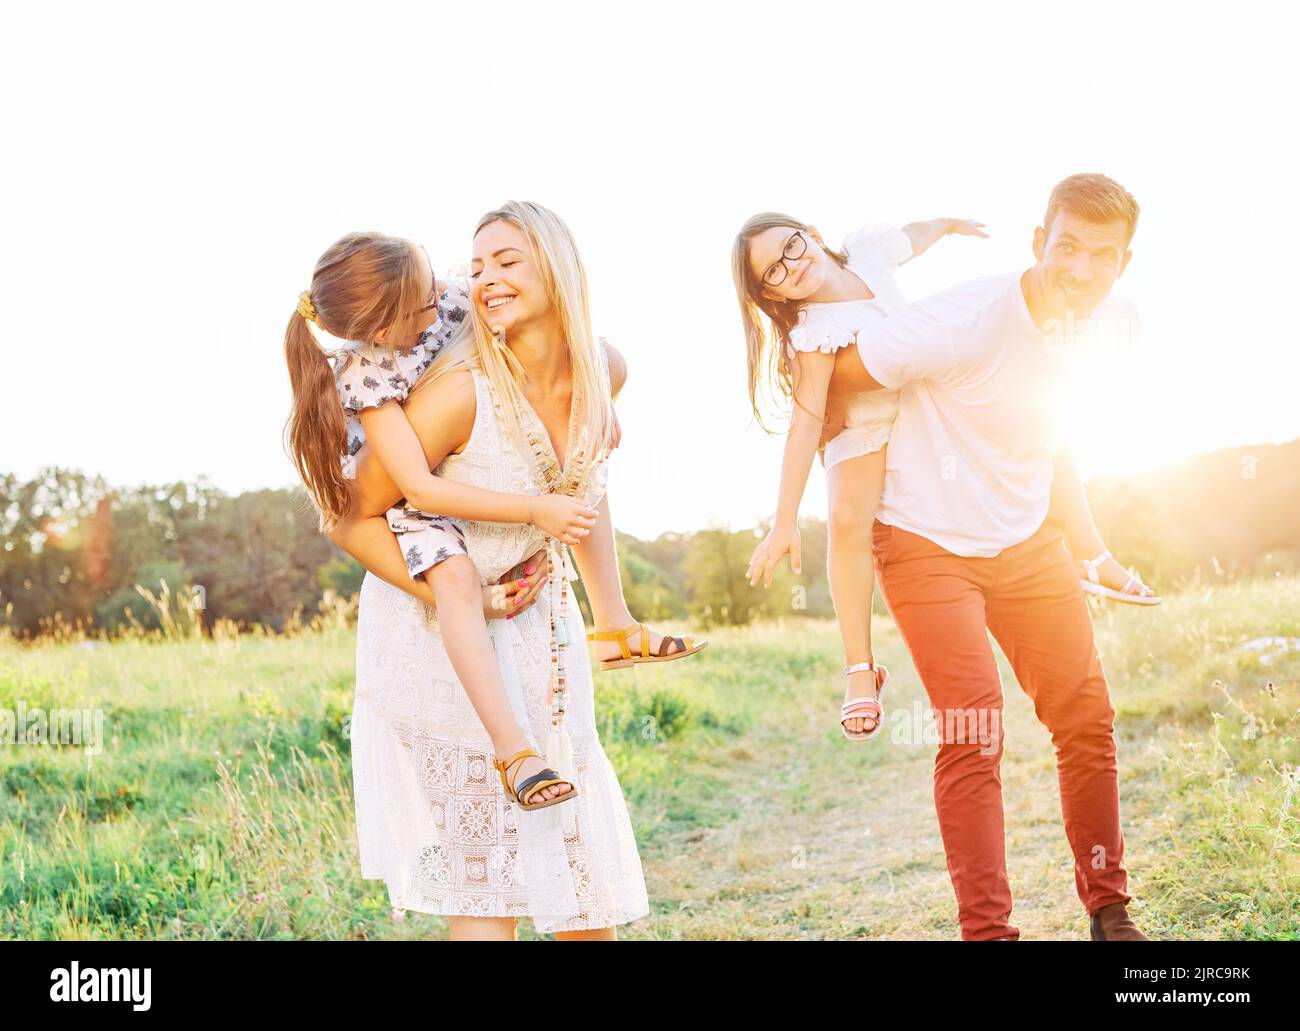 child family outdoor mother woman father girl happy happiness lifestyle having fun bonding piggyback Stock Photo